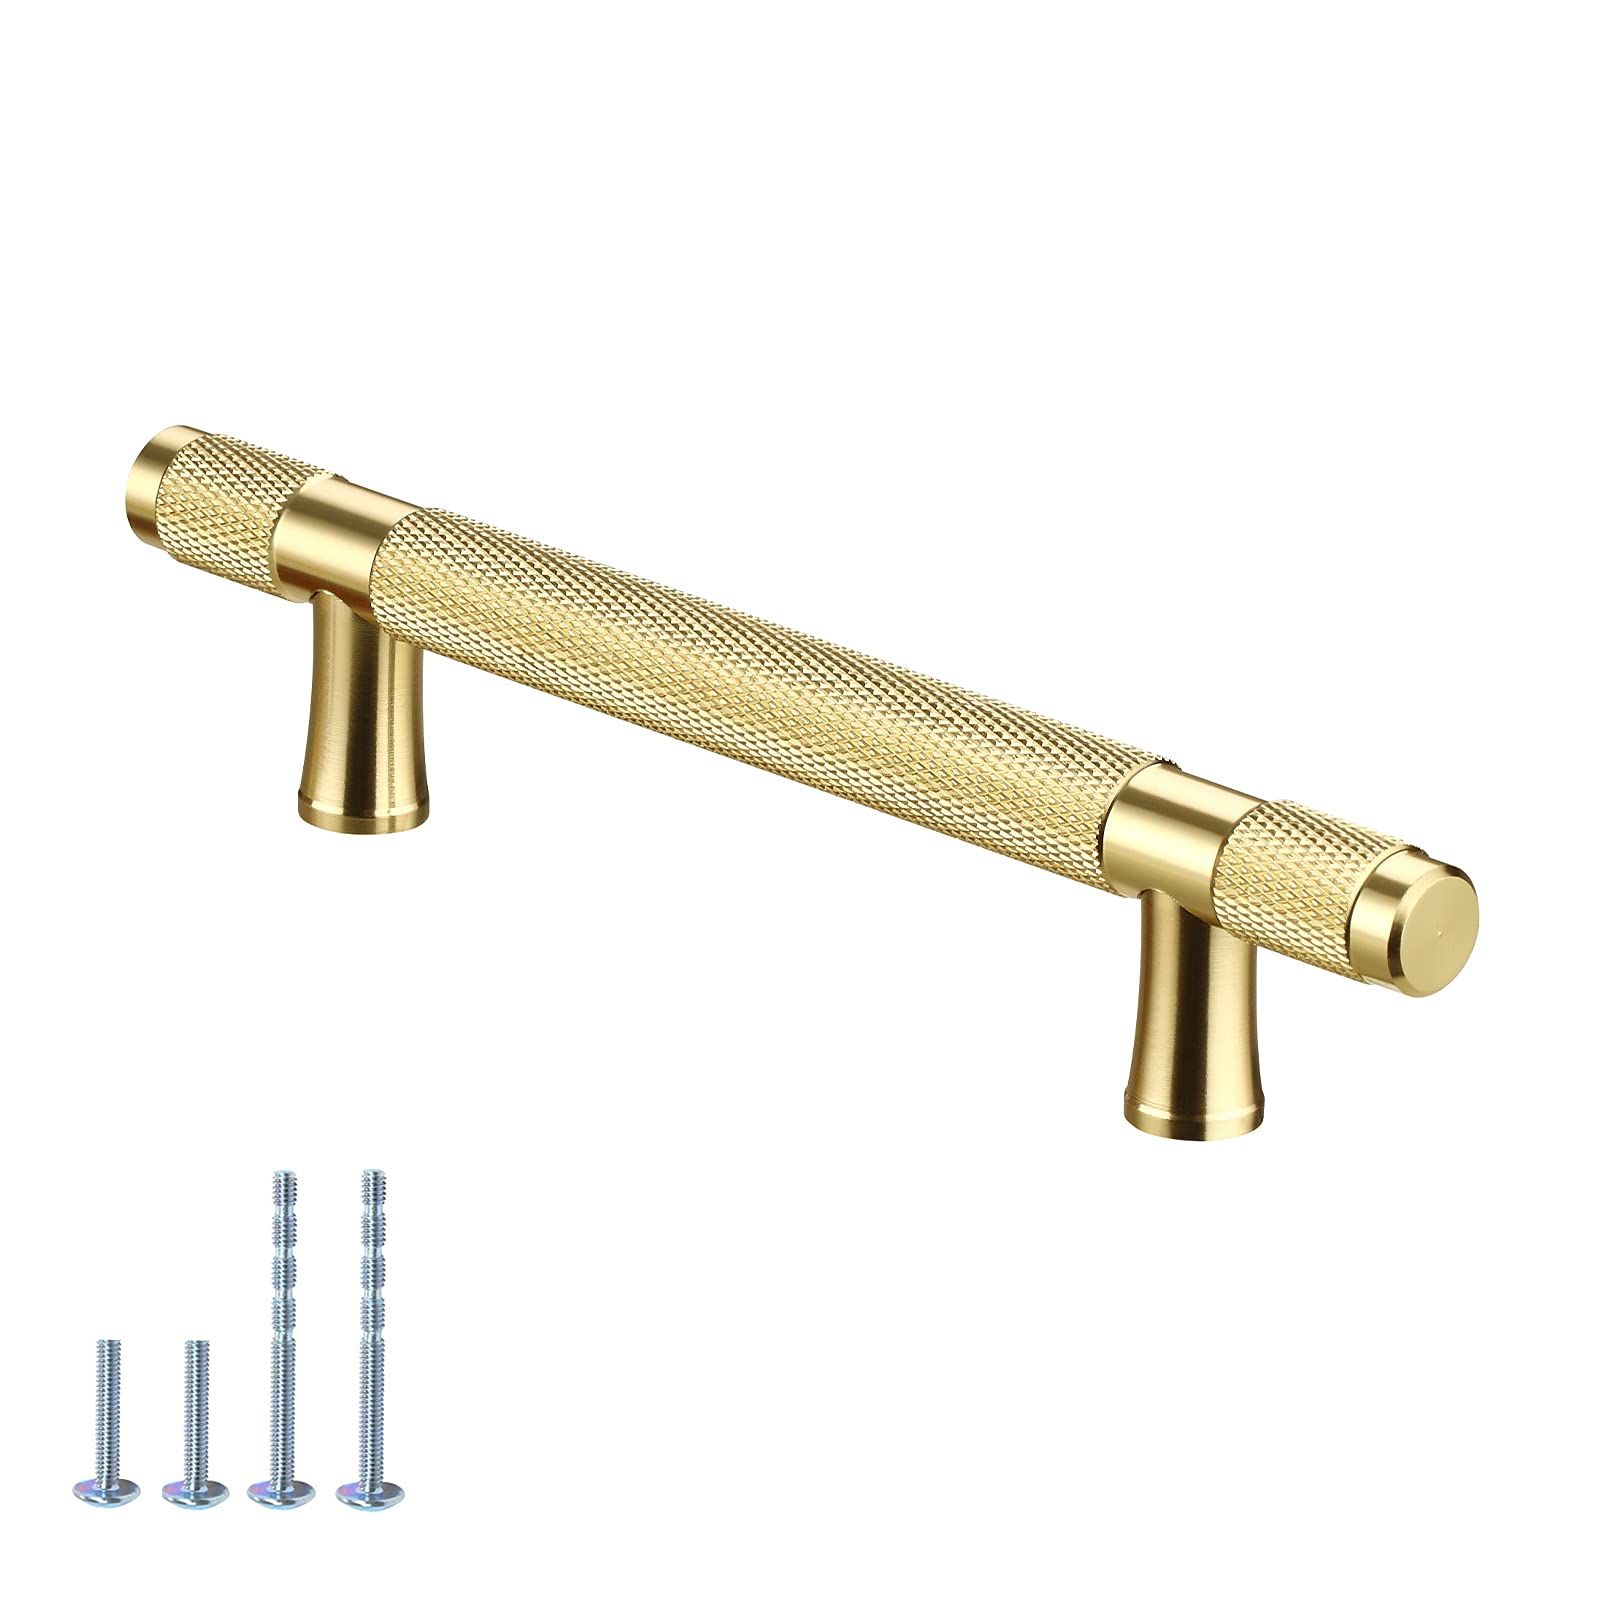 AITITAN 10 Pack Cabinet Handles Gold Knurled Cabinet Pull - 5 Inch Hole Centers (7 Inch Overall Leng | Amazon (US)